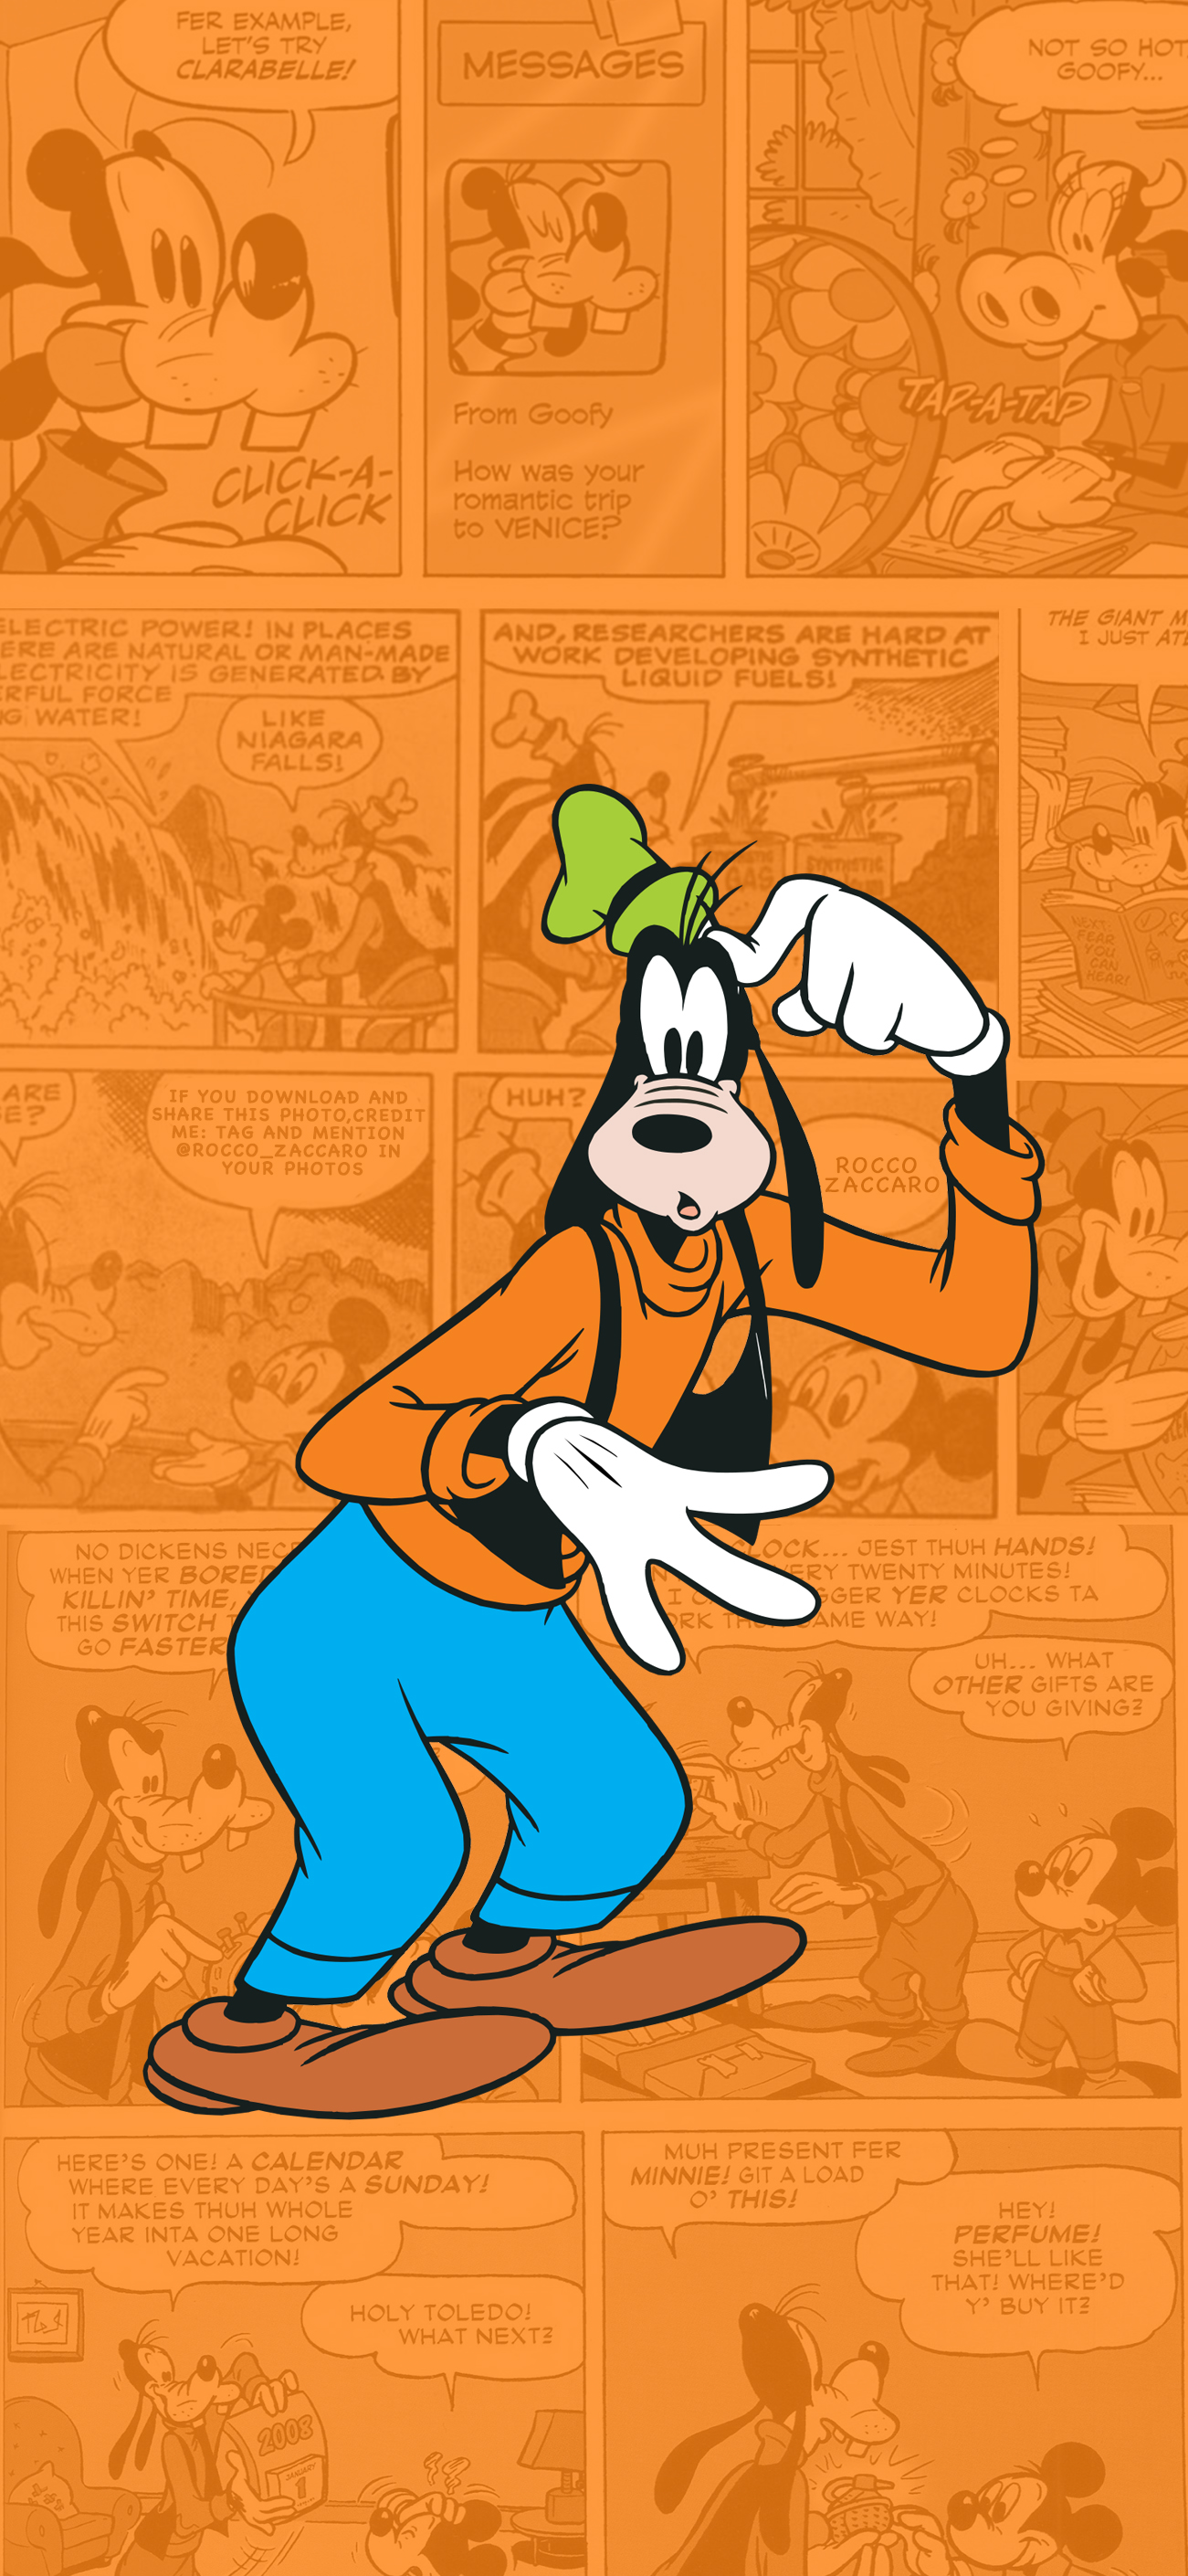 Goofy - Wallpapers Central